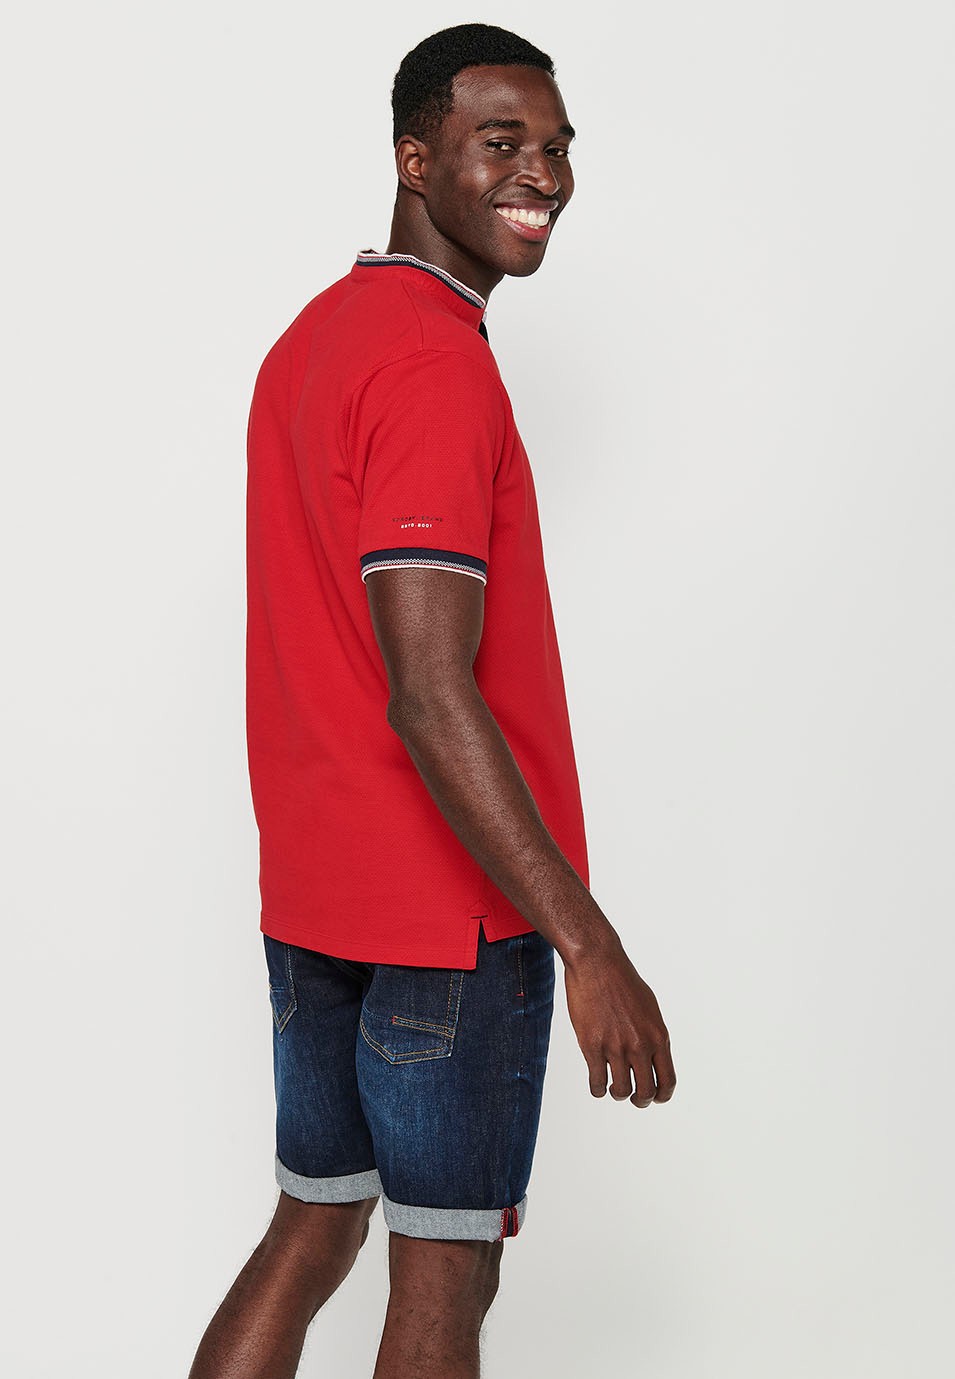 Short-sleeved cotton polo shirt finished in rib with a round neck with buttoned opening and textured with side slits in Red for Men 7